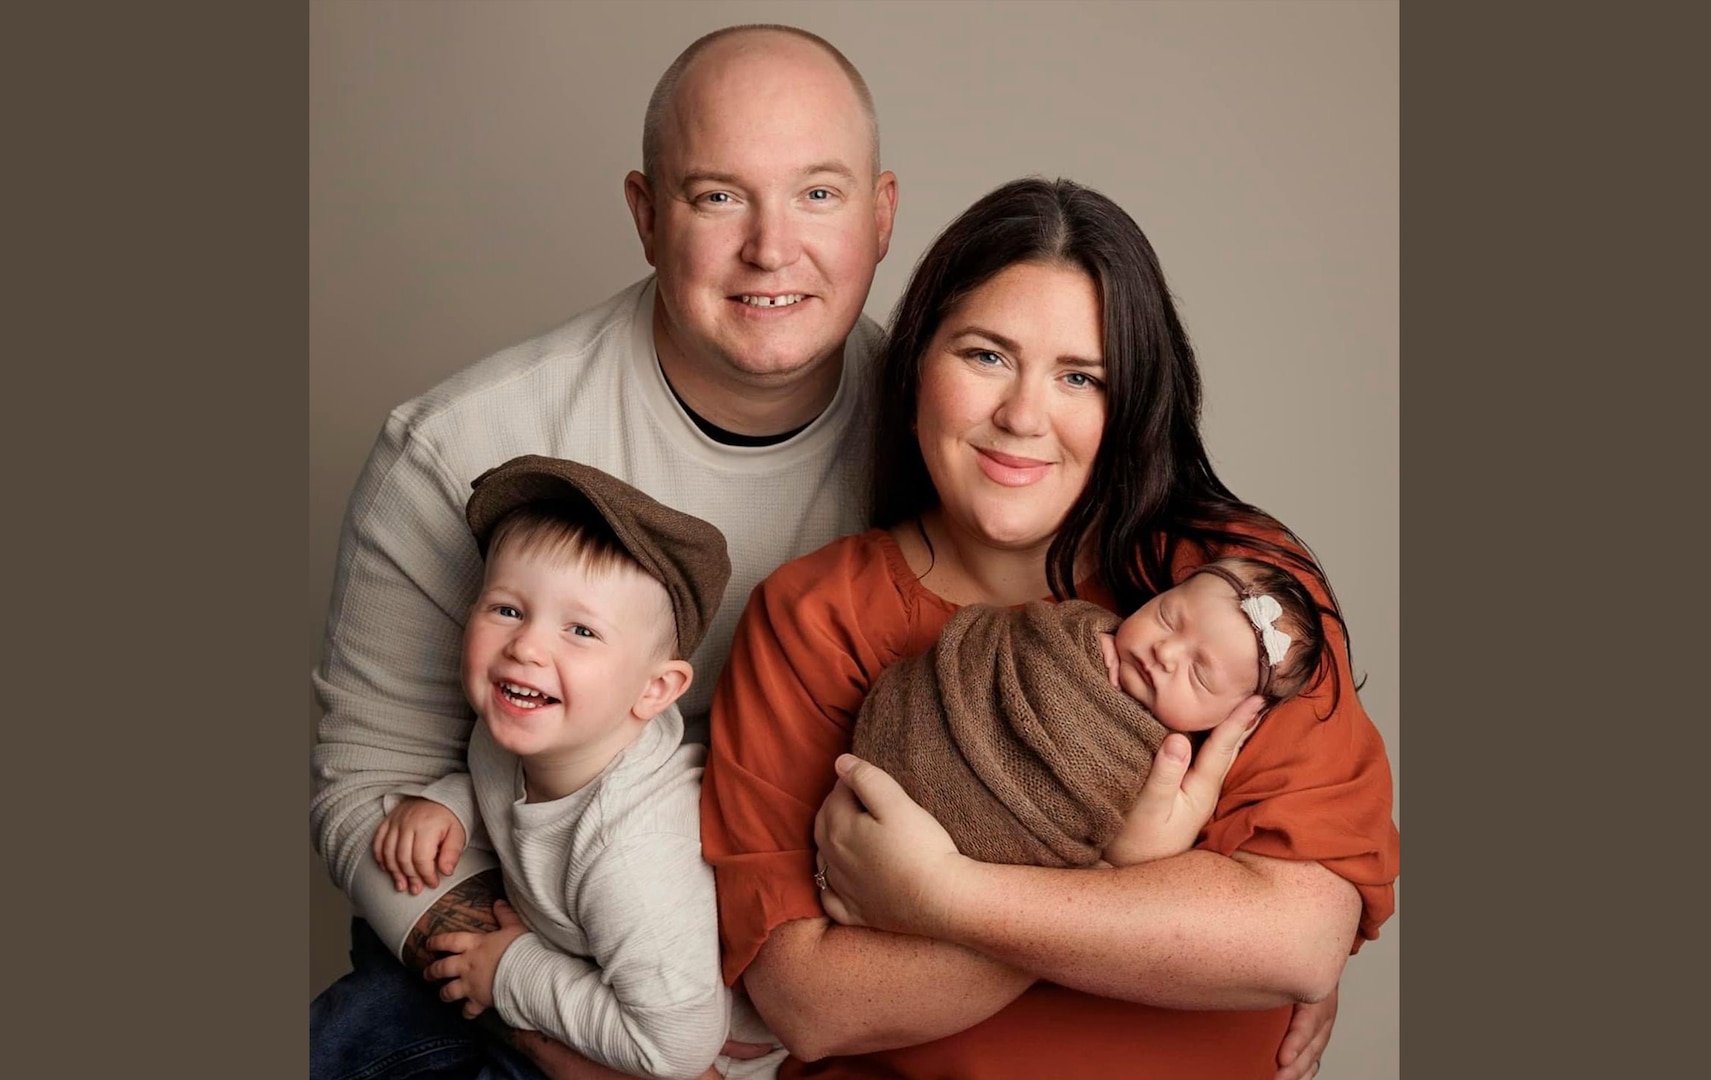 Chief Petty Officer Robert Elliott and wife, Taylor, with their son, Macklin, and daughter, Matilda. Chief Elliott has used both tuition and credentialing assistance to build a strong record of professional development.